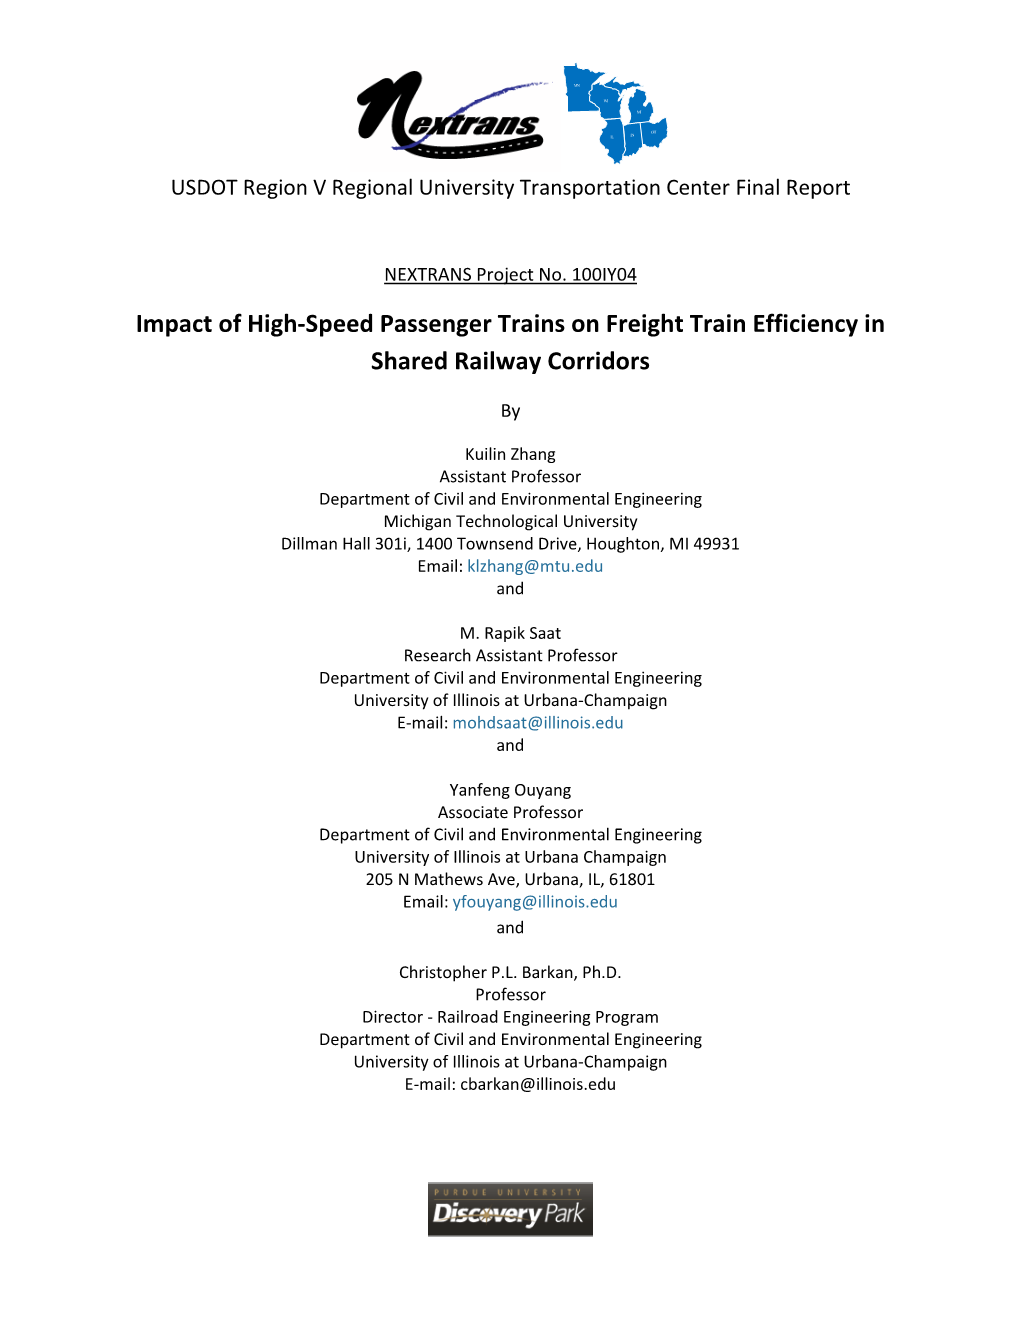 Impact of High-Speed Passenger Trains on Freight Train Efficiency in Shared Railway Corridors